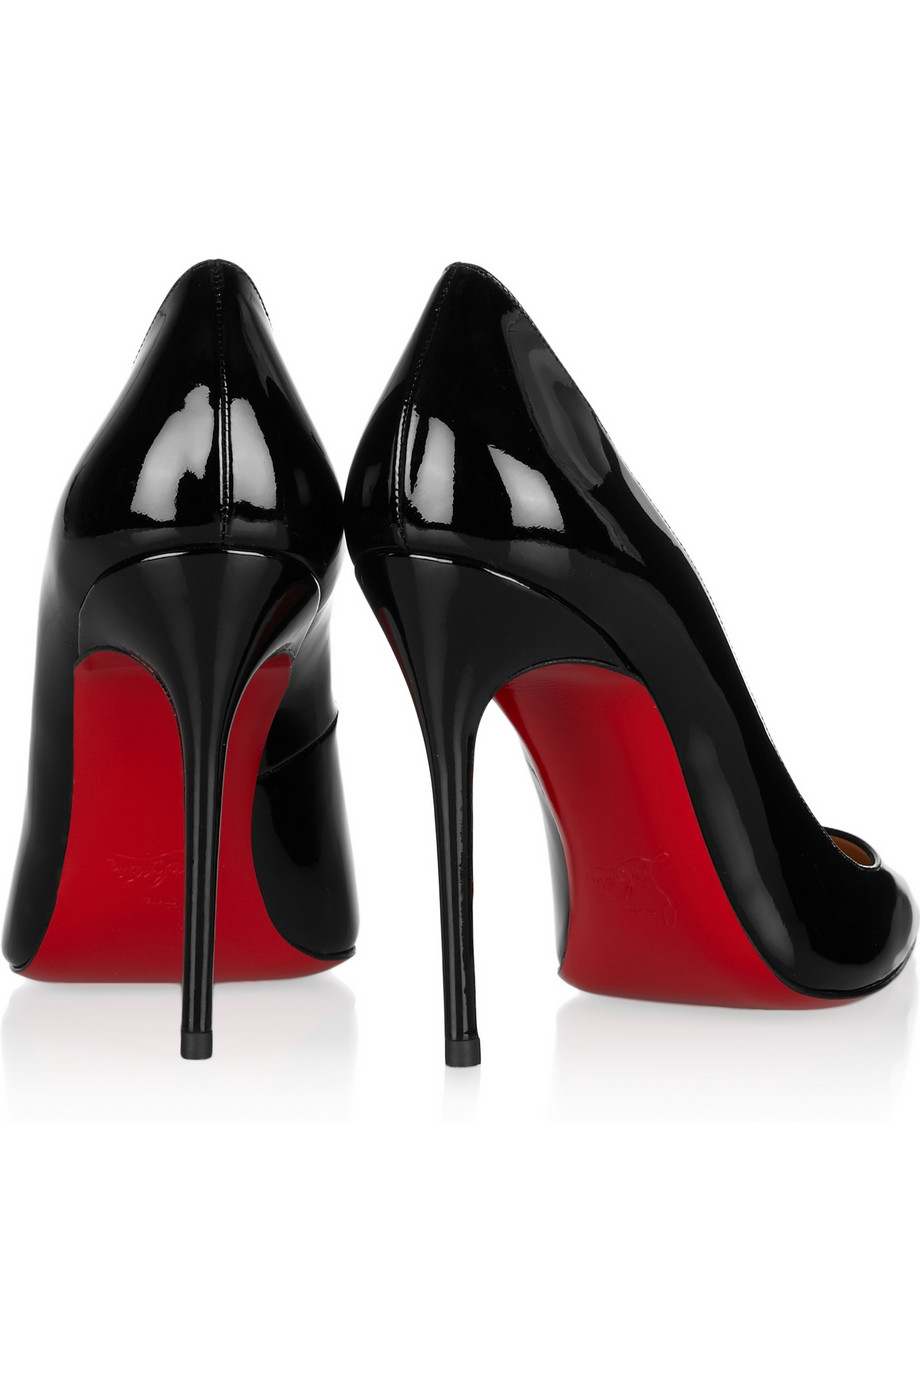 Lyst - Christian Louboutin Decollete 100 Patentleather Pumps in Black